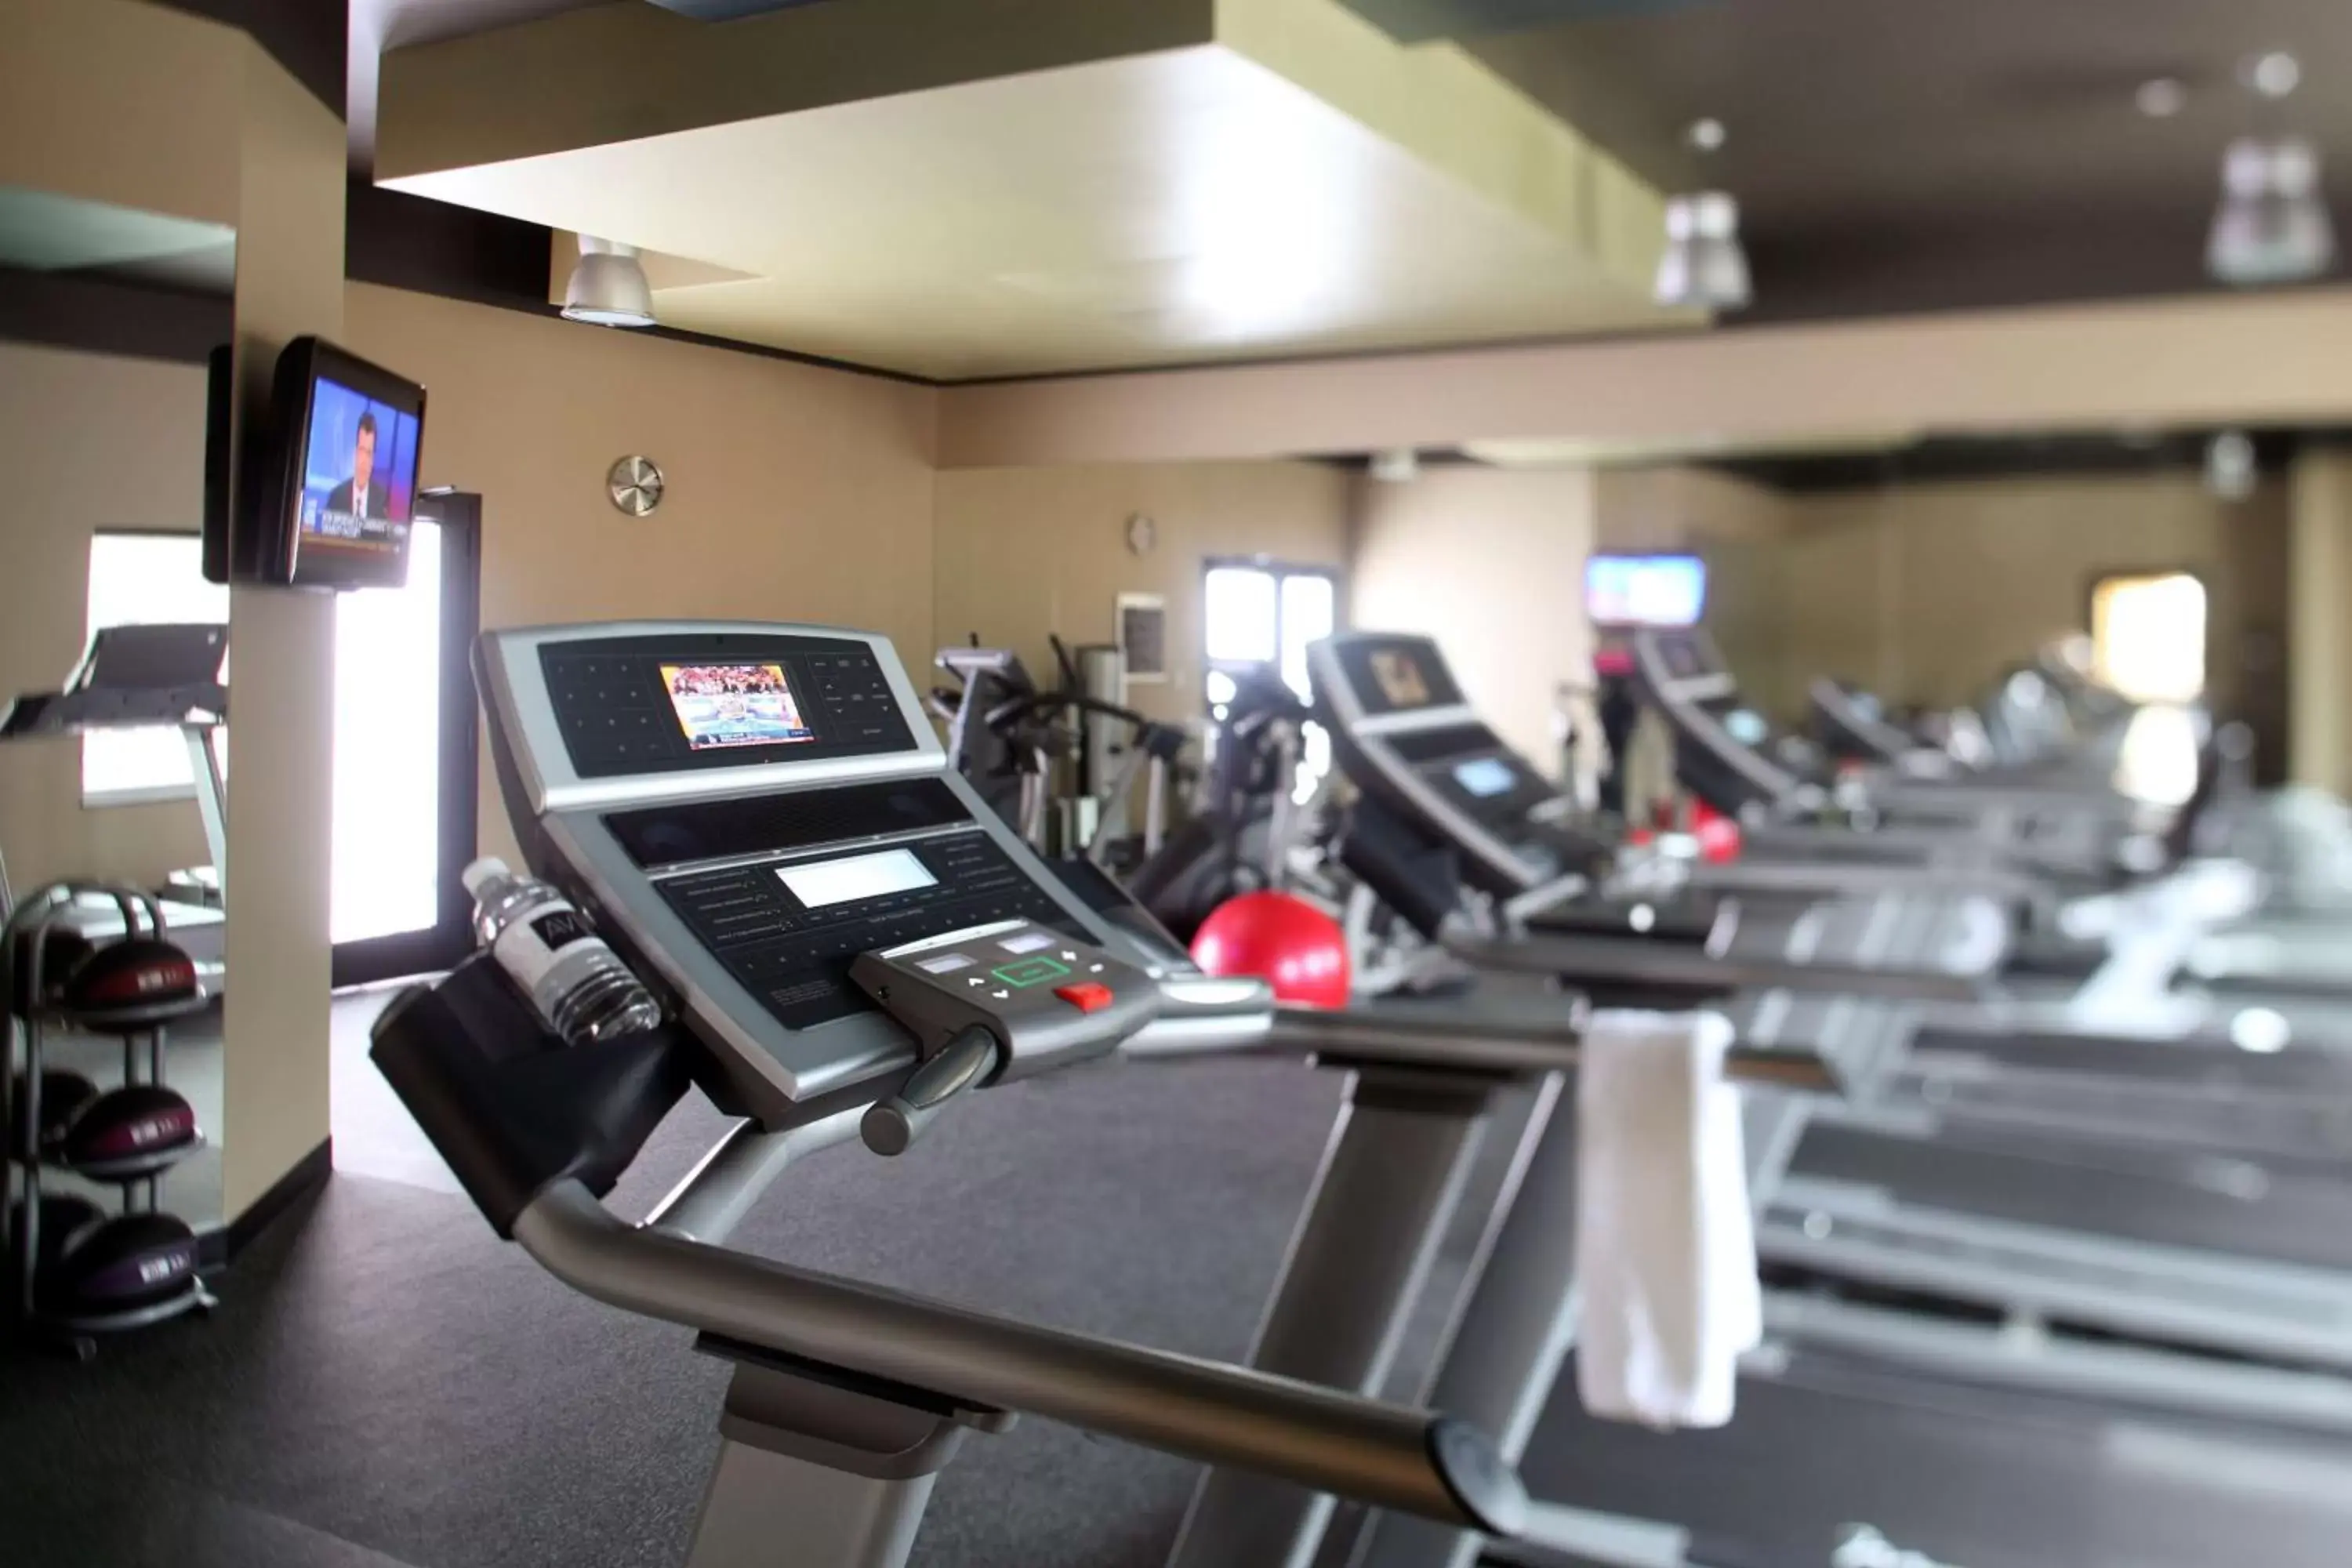 Fitness centre/facilities, Fitness Center/Facilities in Hyatt Centric The Woodlands